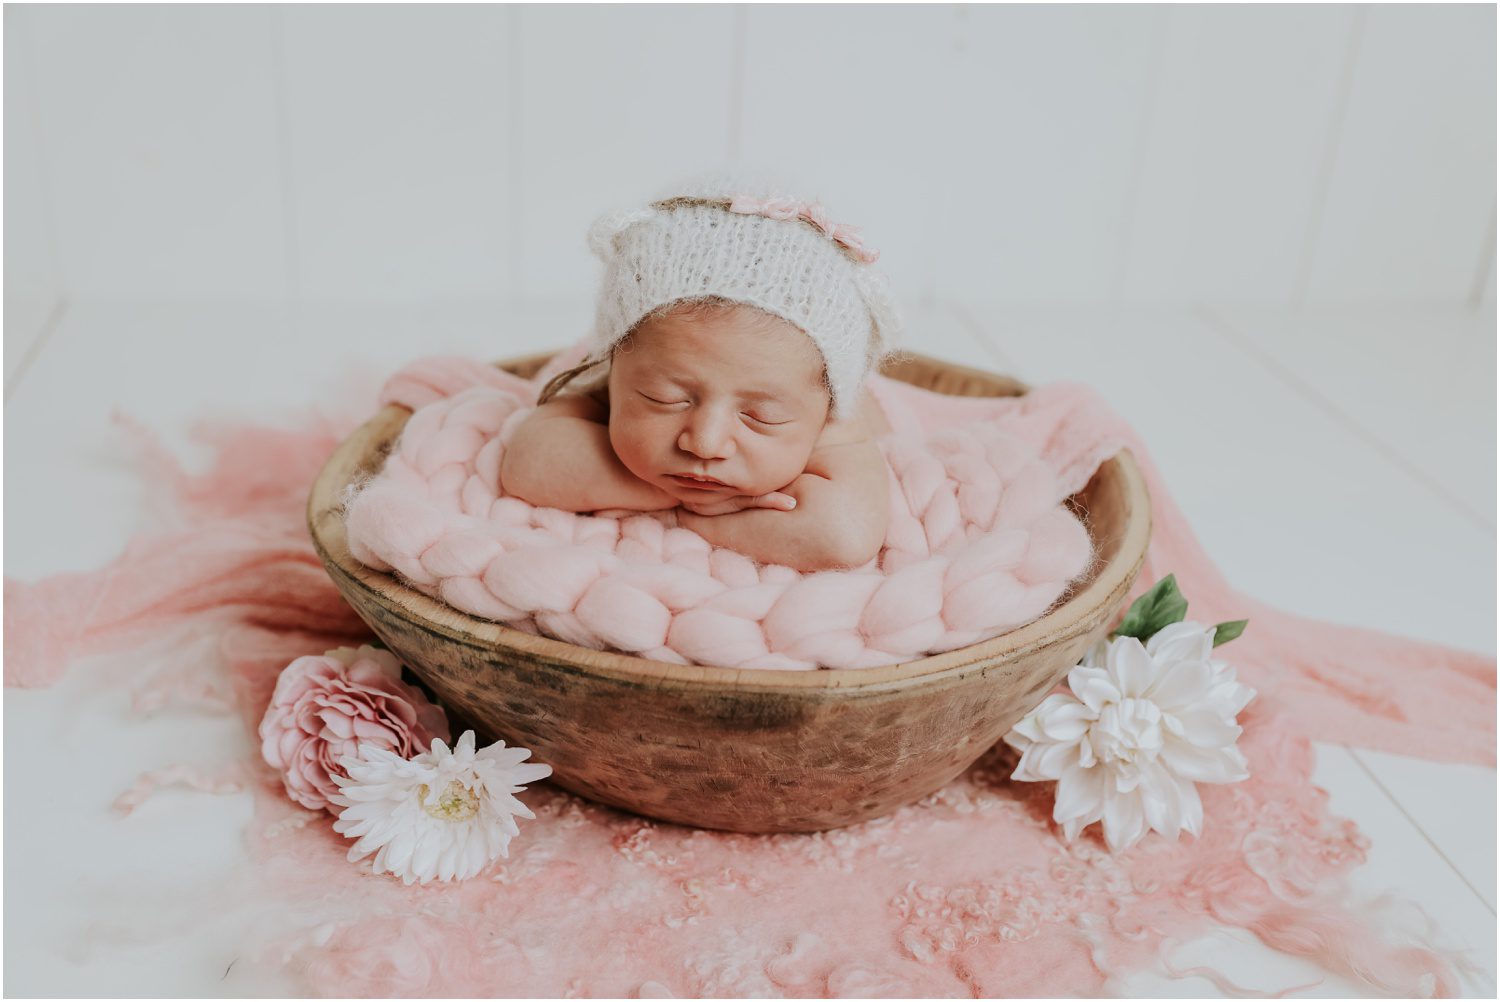 NEPA Studio Newborn Photographer, baby in a bowl with pink blanket